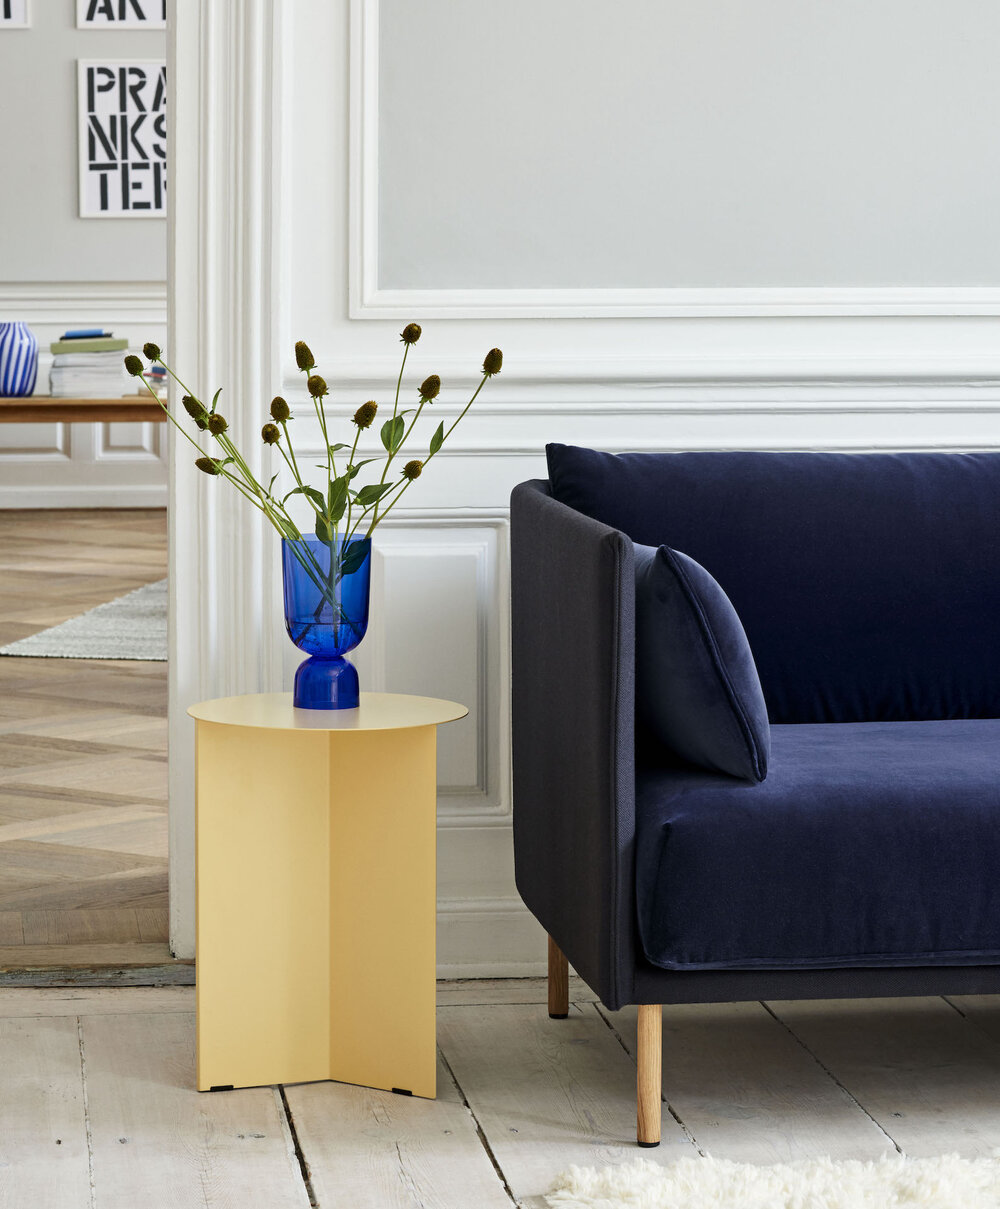 Silhouette Sofa Duo 3 seater backrest Steelcut Trio 195 cushions Lola navy oiled oak legs_Slit Table High light yellow_Bottoms Up Vase S electric blue.jpg